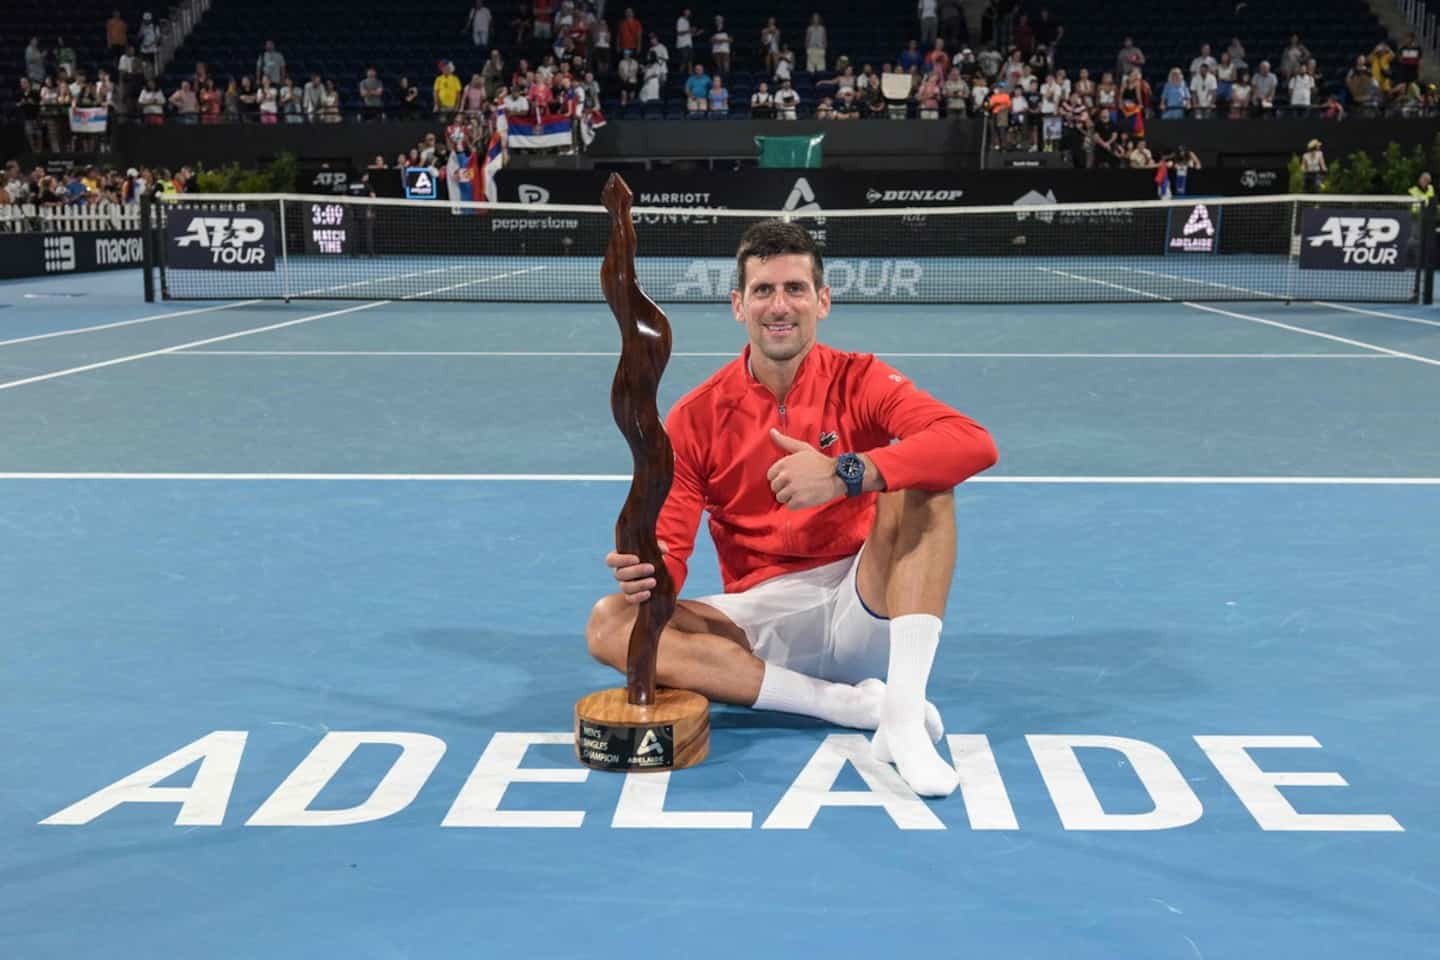 Djokovic wins his first title of the year in Adelaide